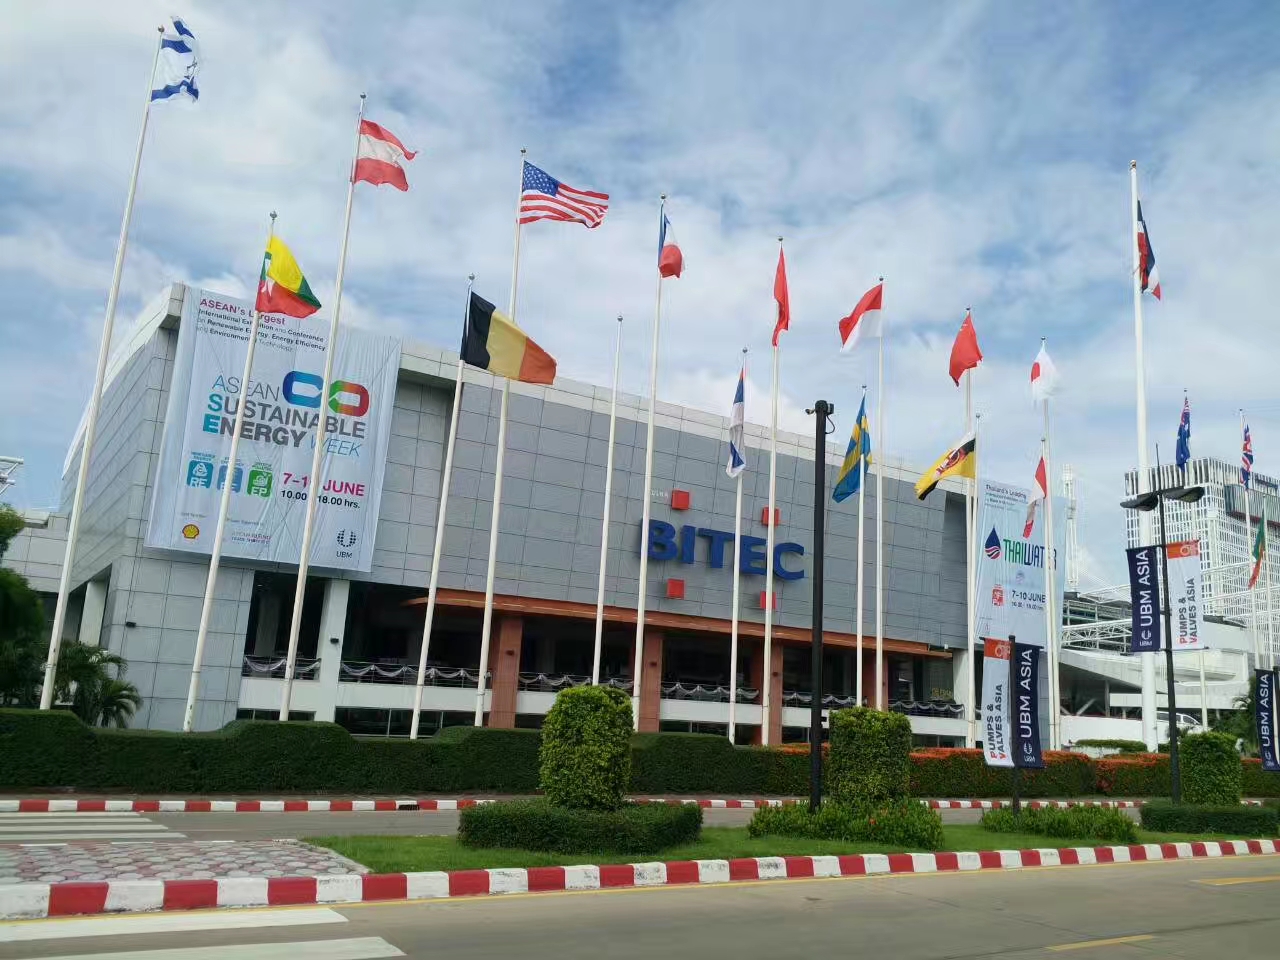 2017.6.7-2017.6.10, participated in the 2016 Thailand International Water Treatment and Pump Valve Exhibition